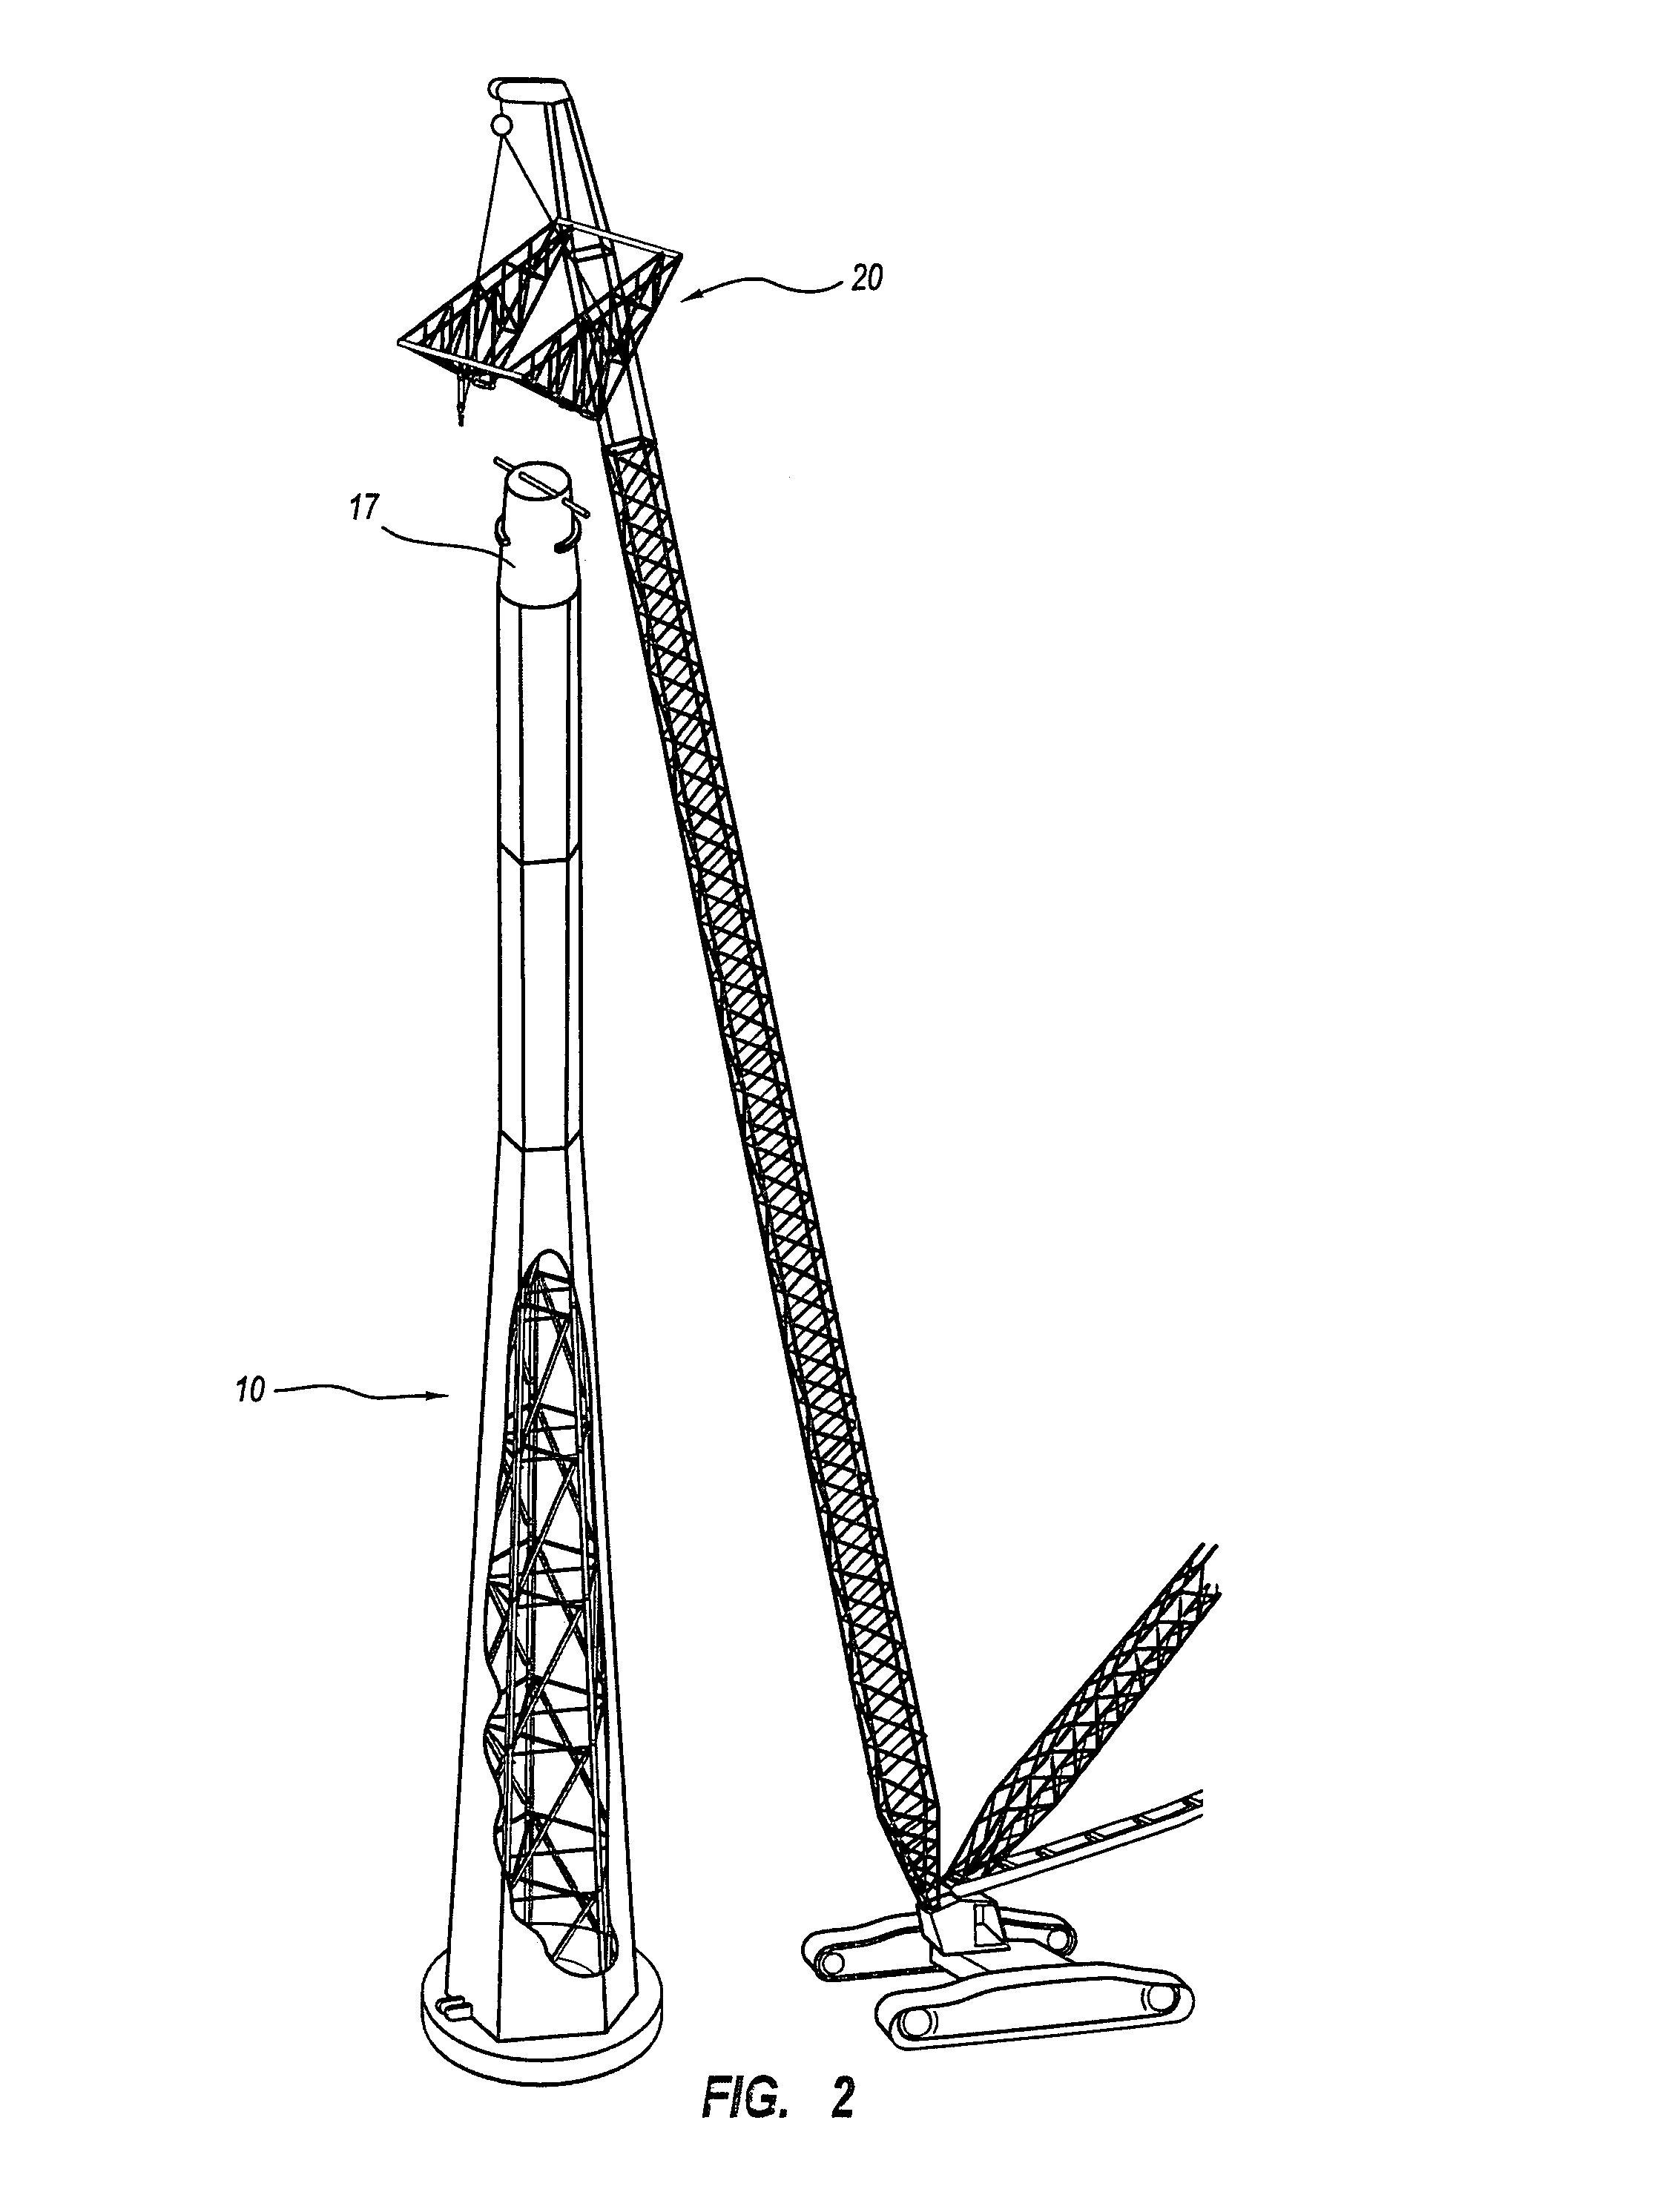 Lifting system and apparatus for constructing and enclosing wind turbine towers